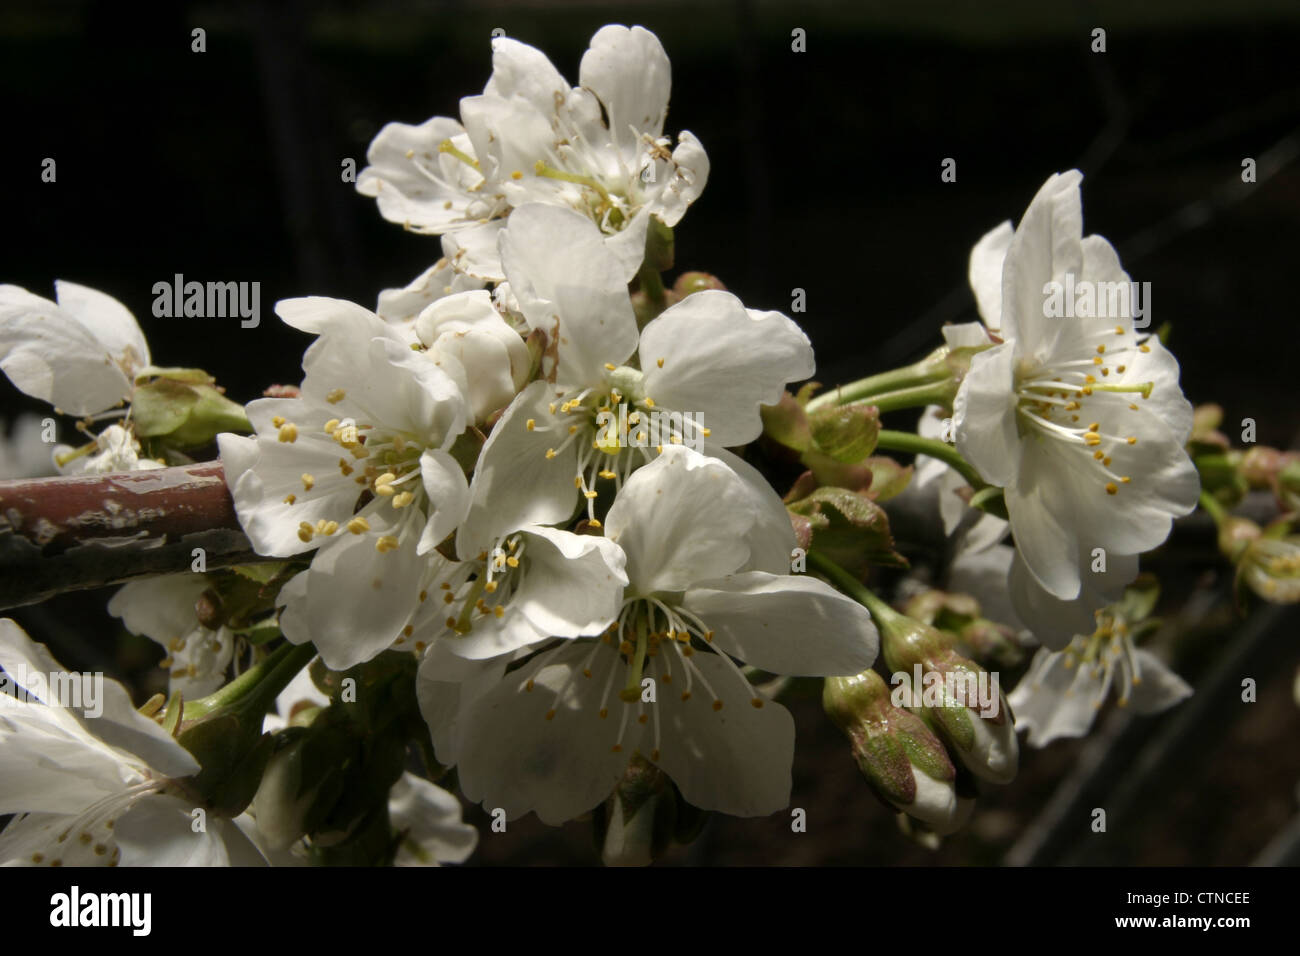 Picture: Steve Race - The flowers of the Cherry tree (Prunus cerasus) variety 'Primulat', Catalunya, Spain. Stock Photo